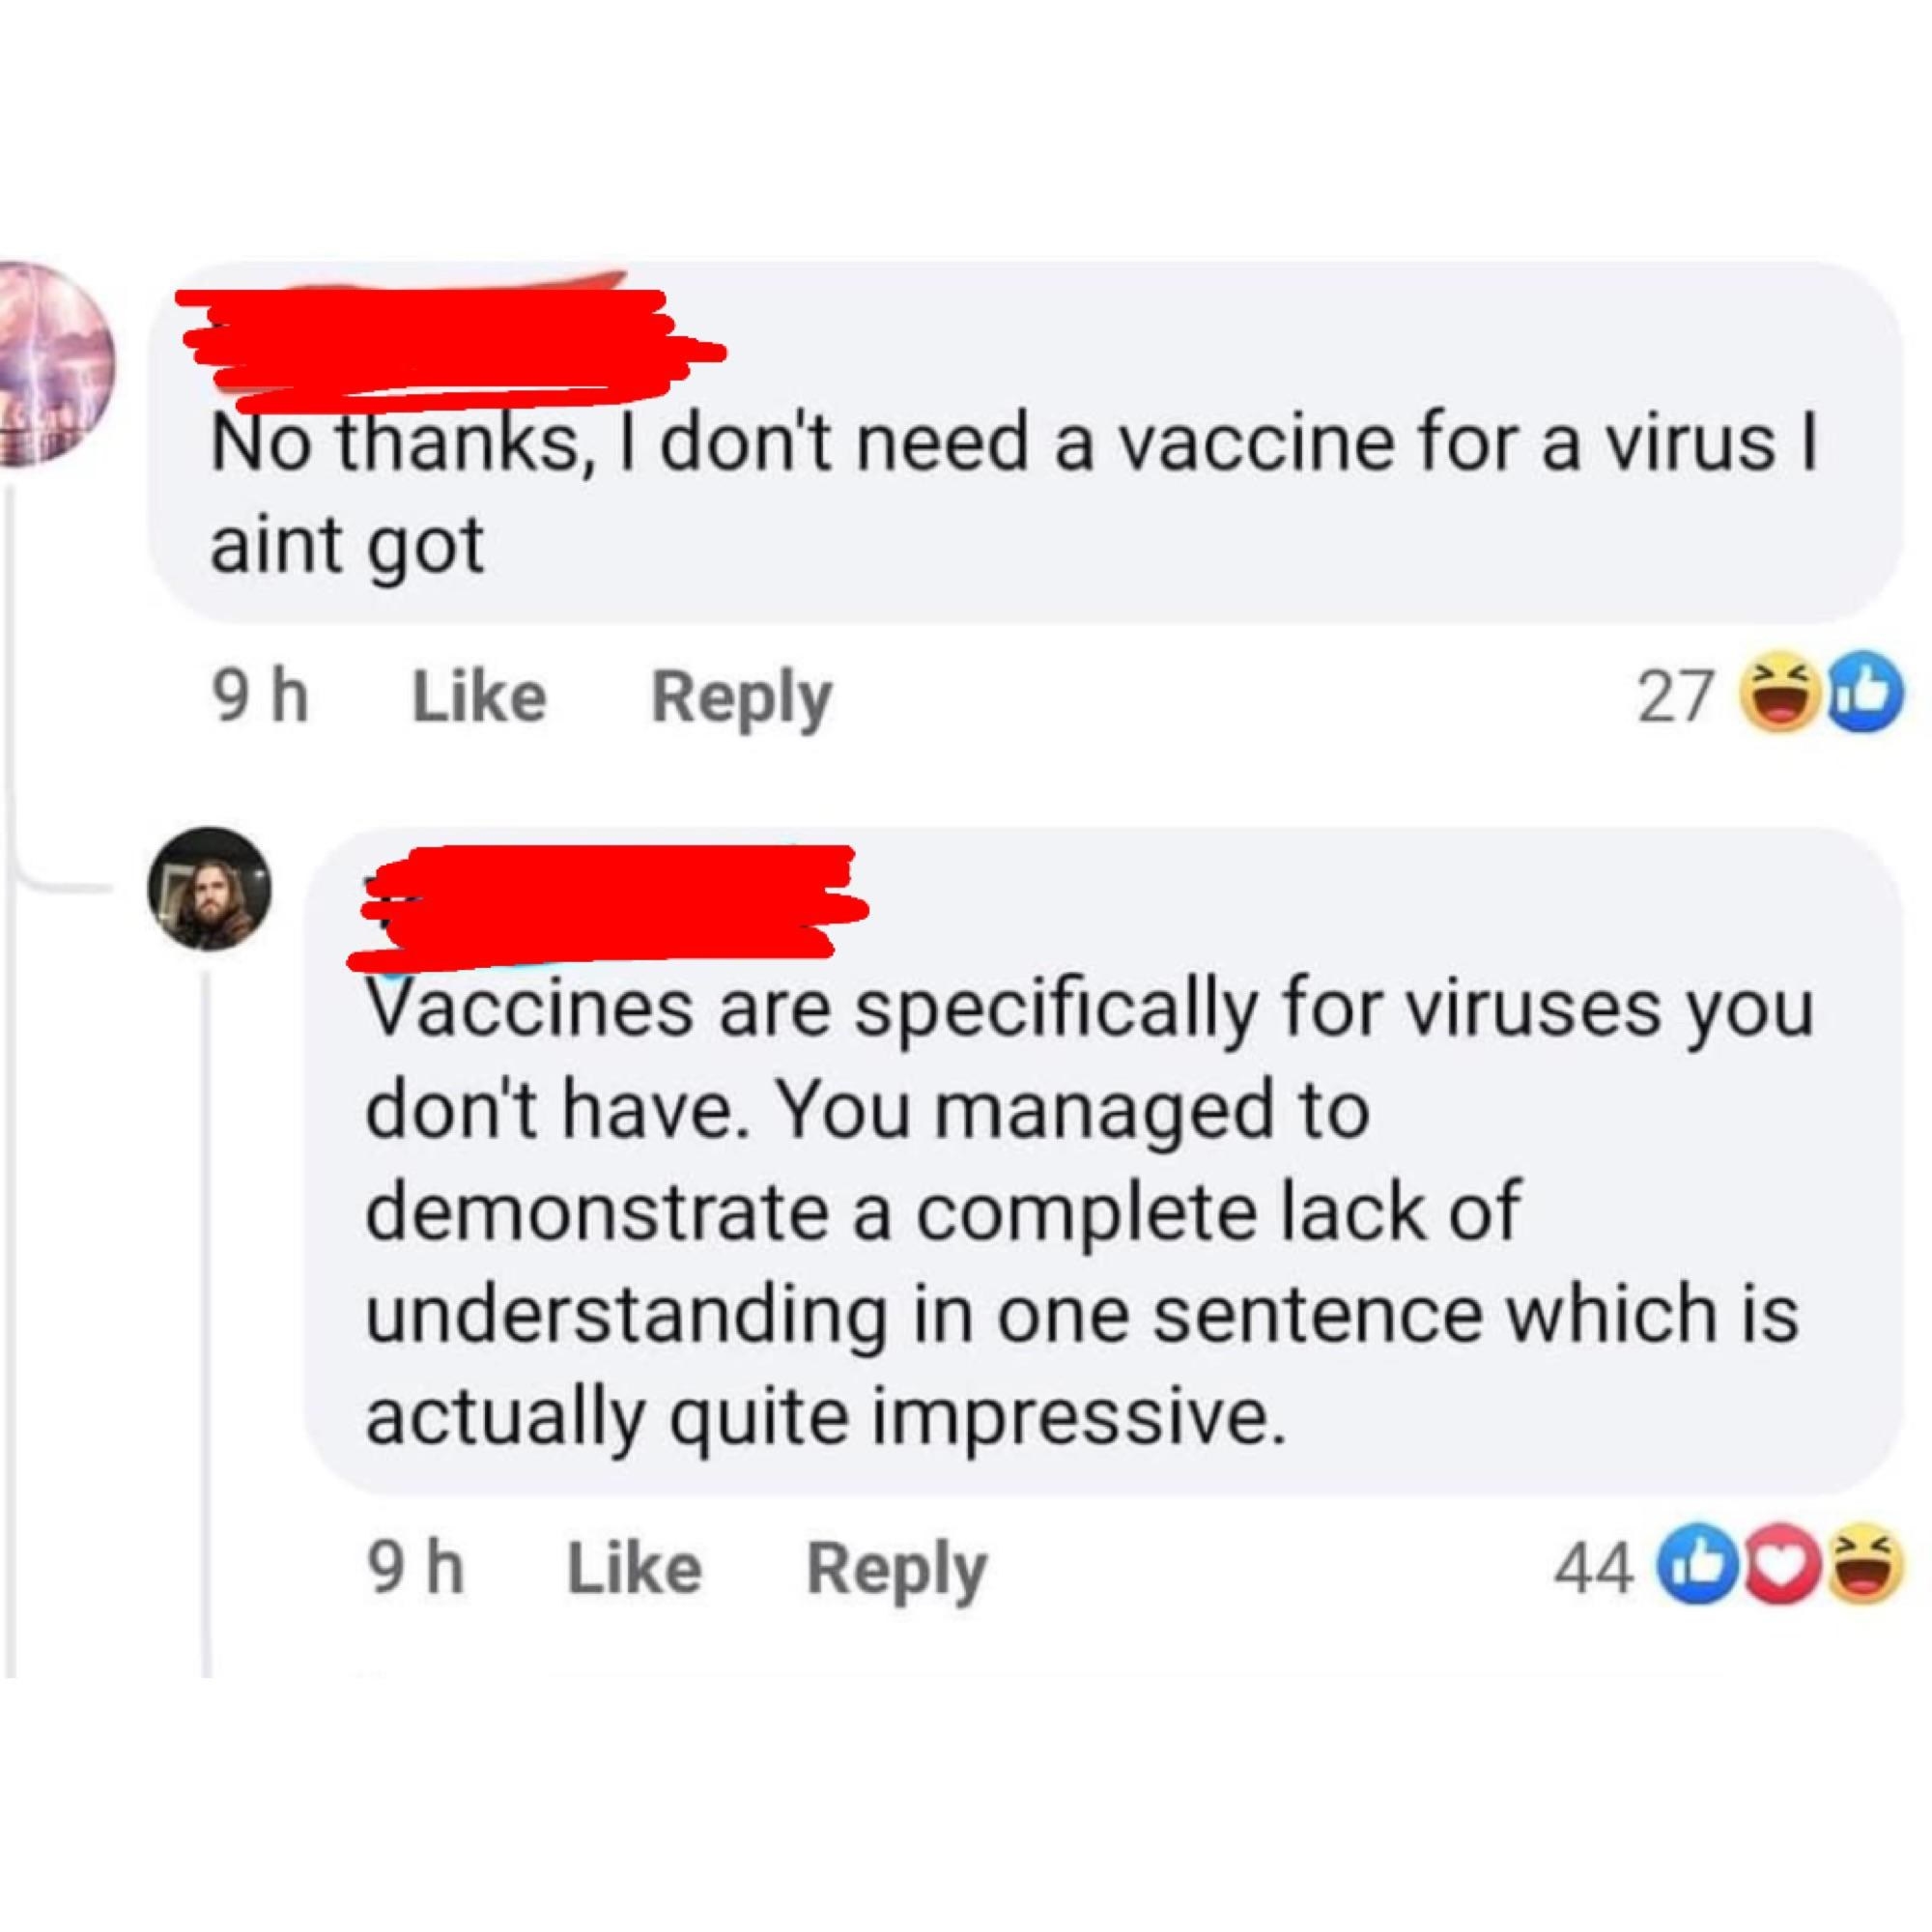 &quot;No thanks, I don&#x27;t need a vaccine for a virus I ain&#x27;t got&quot; Response: Vaccines are specifically for viruses you don&#x27;t have